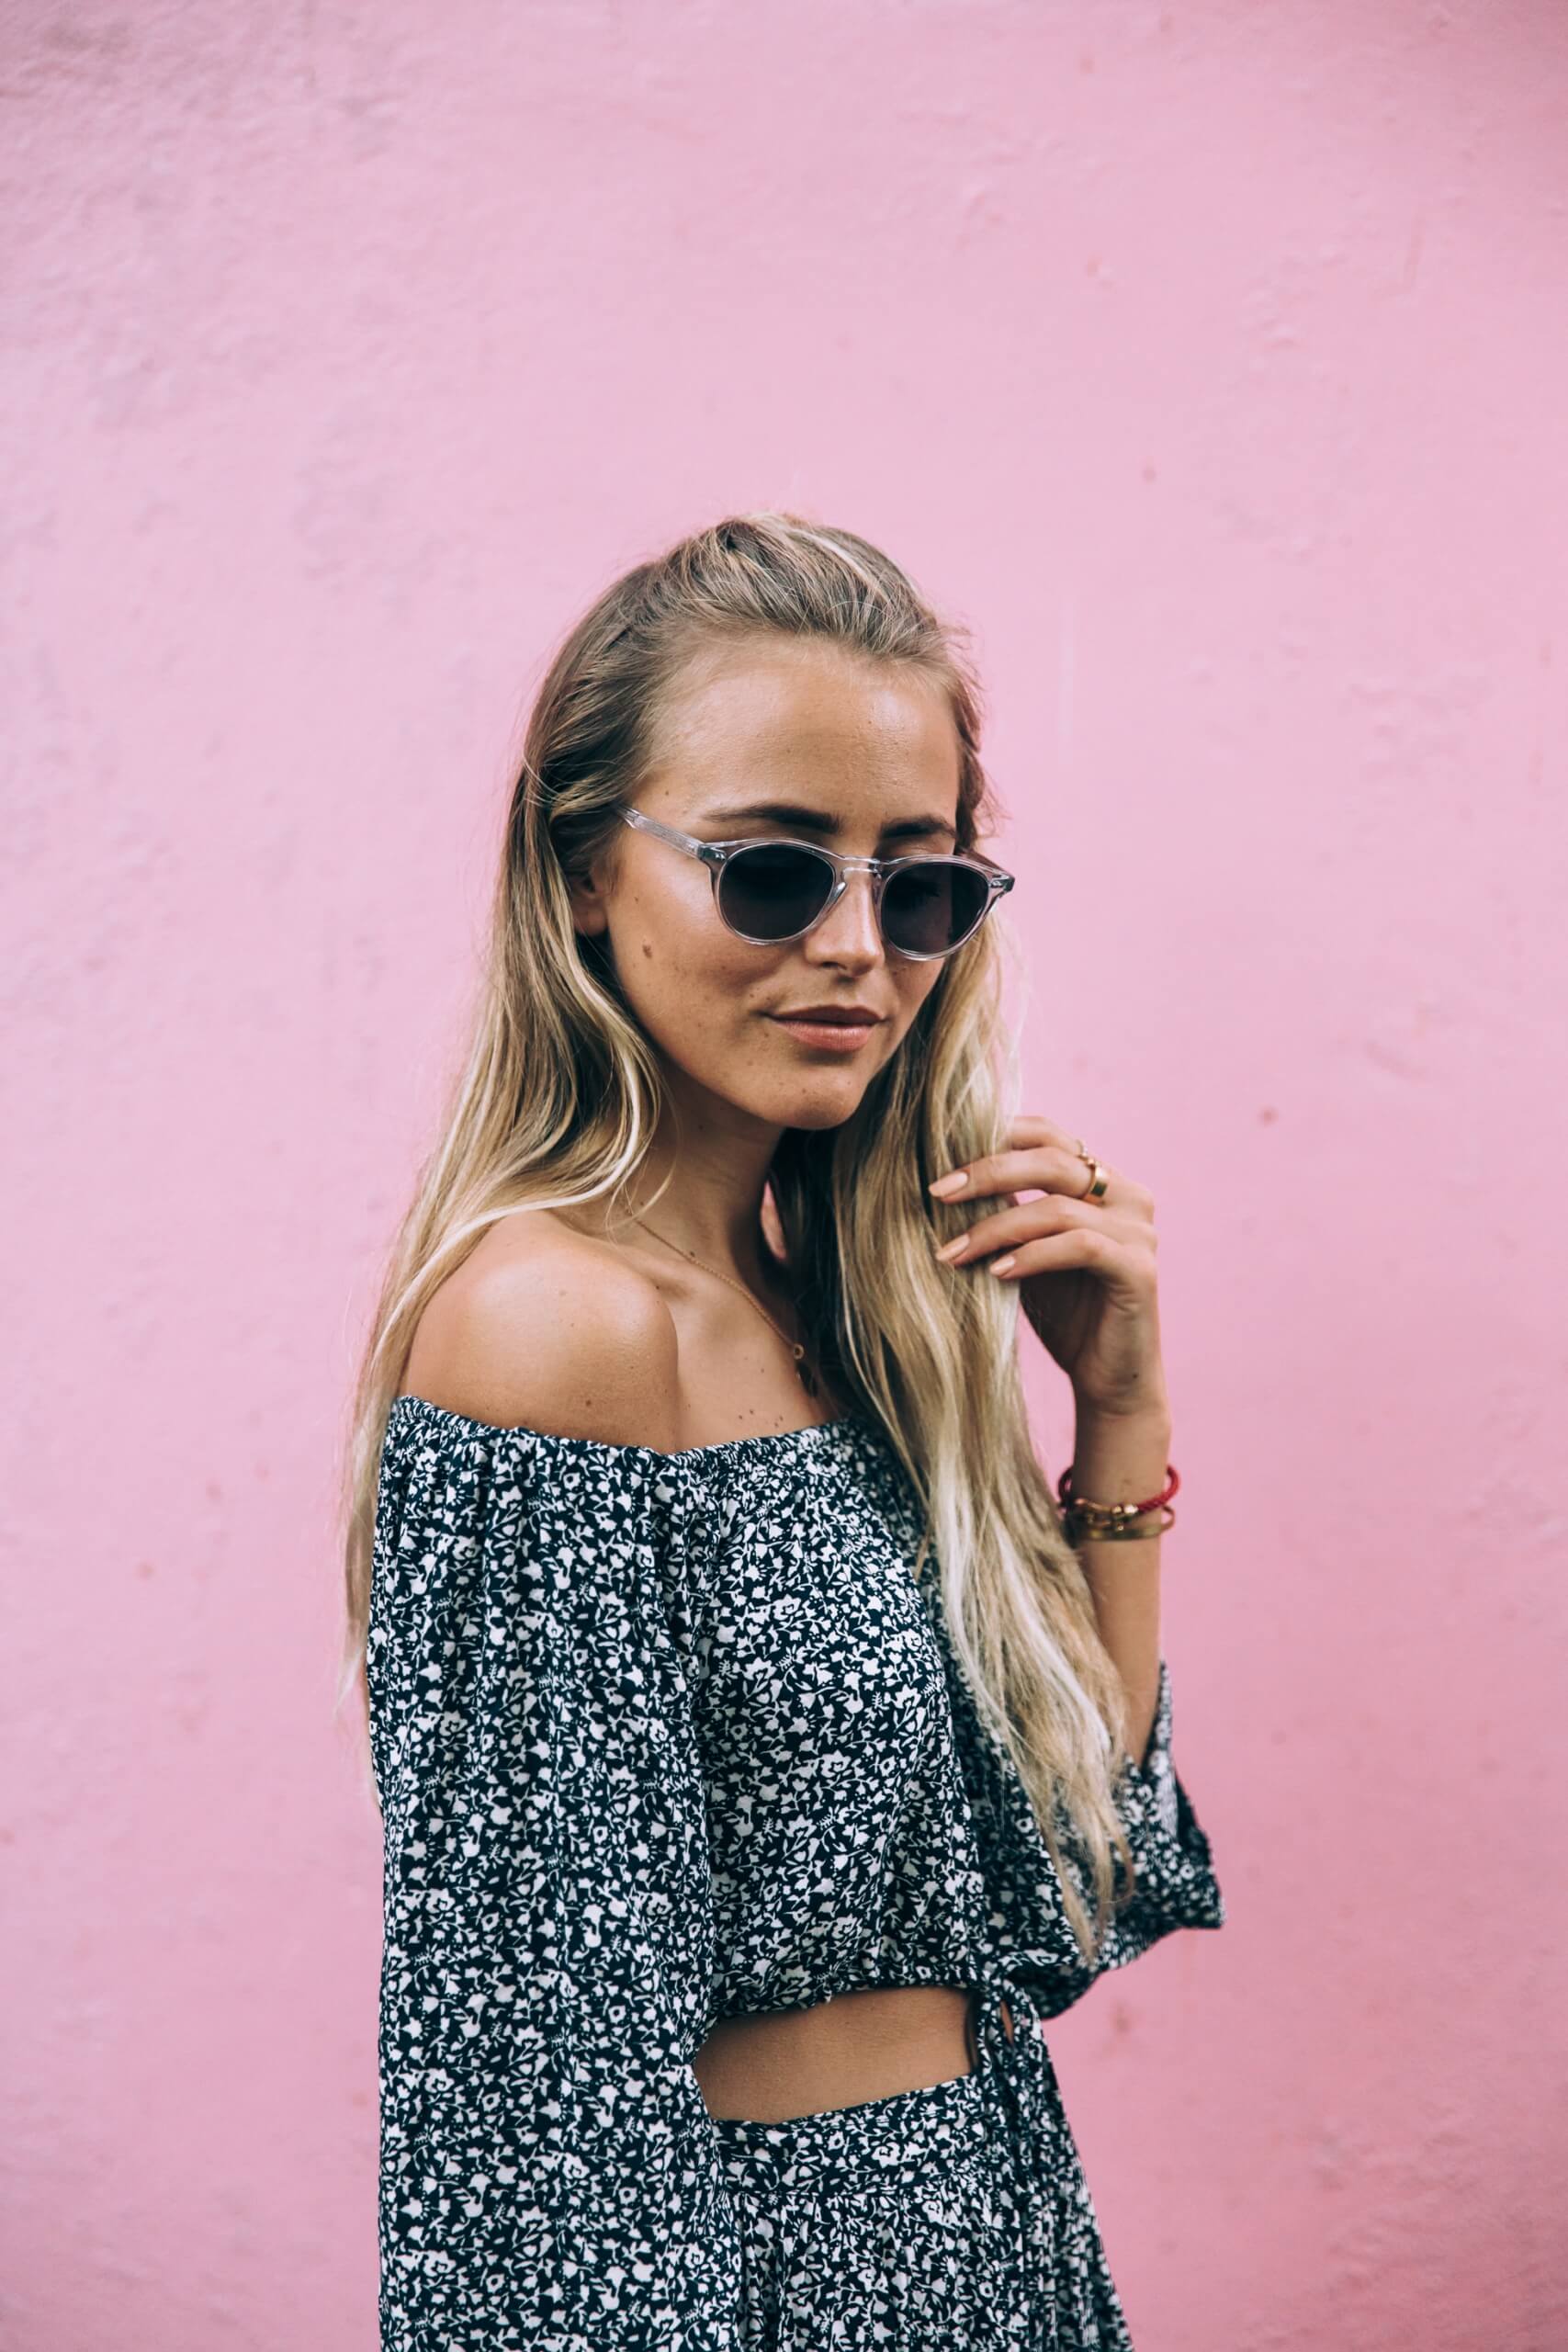 Janni Deler Mauritius by Fabian Wester -5